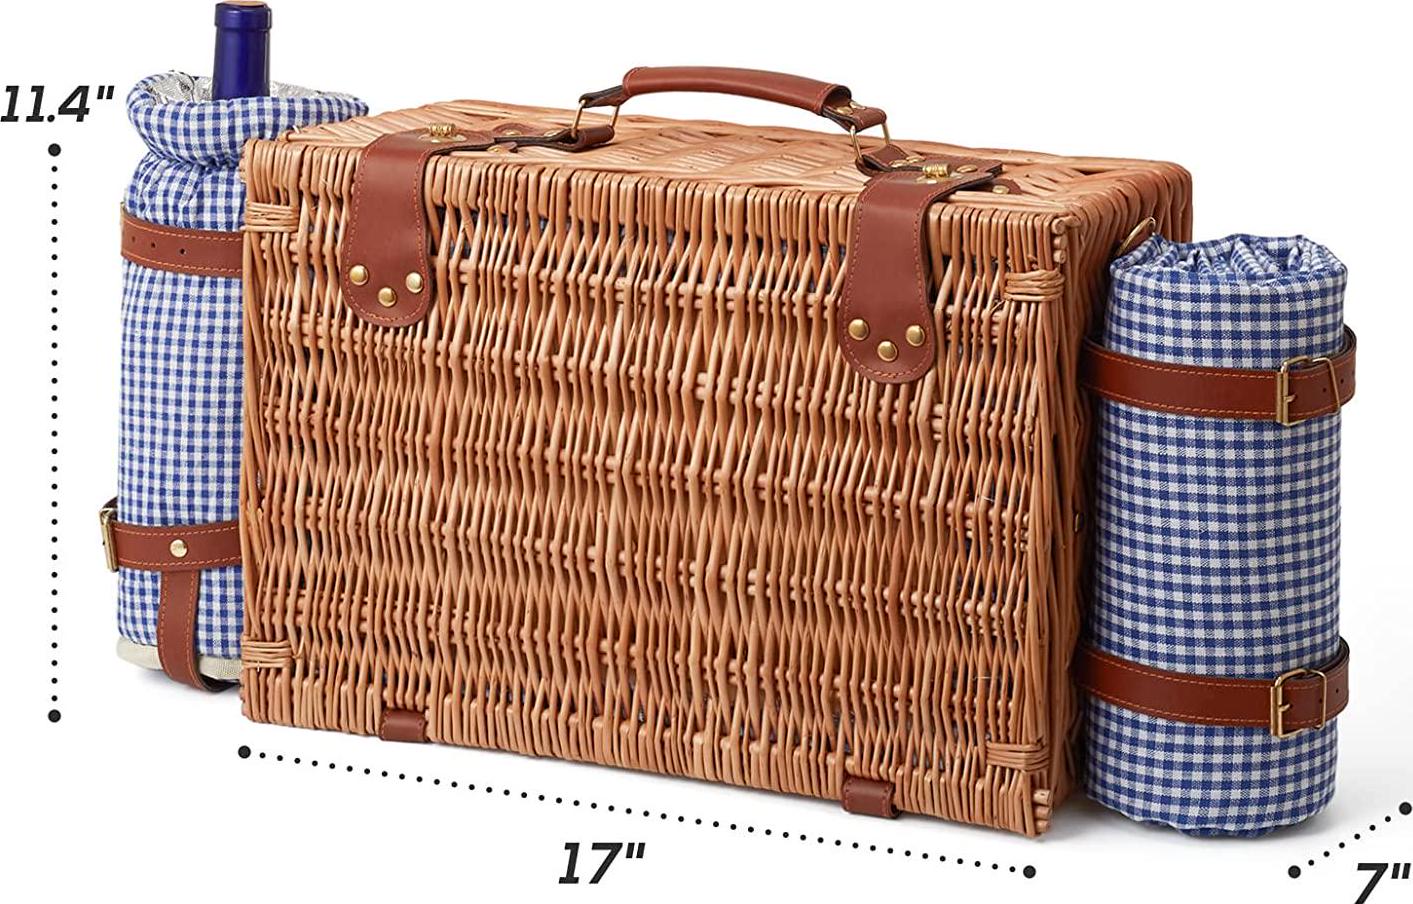 DHAEE Wicker Picnic Basket Set for 4 Person with Cooler Compartment and Waterproof Picnic Blanket,Removable Strap,Wine Bag,Cutlery Set,for Camping